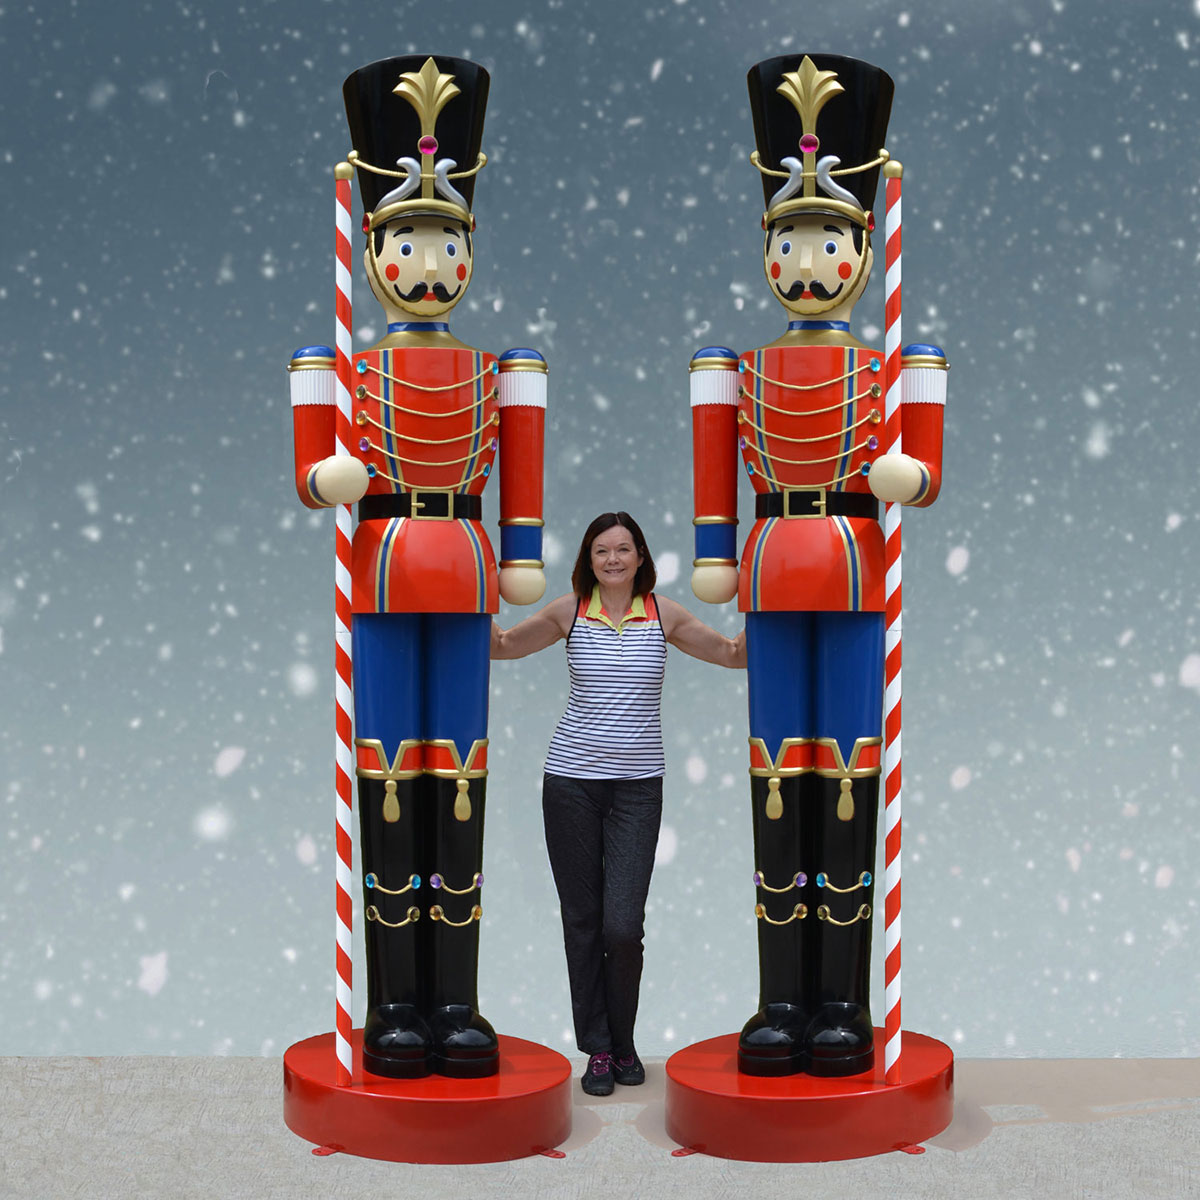 Giant toy soldiers